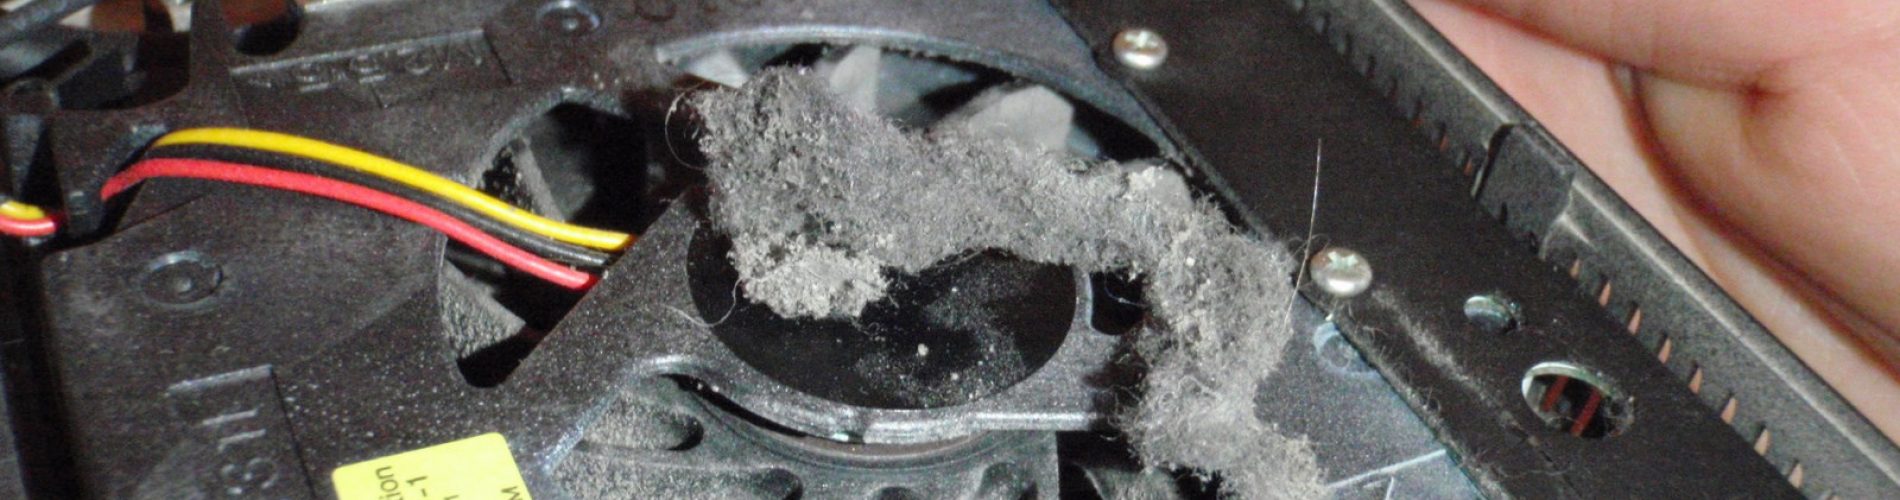 Dust on the fan of a computer being checked on the back